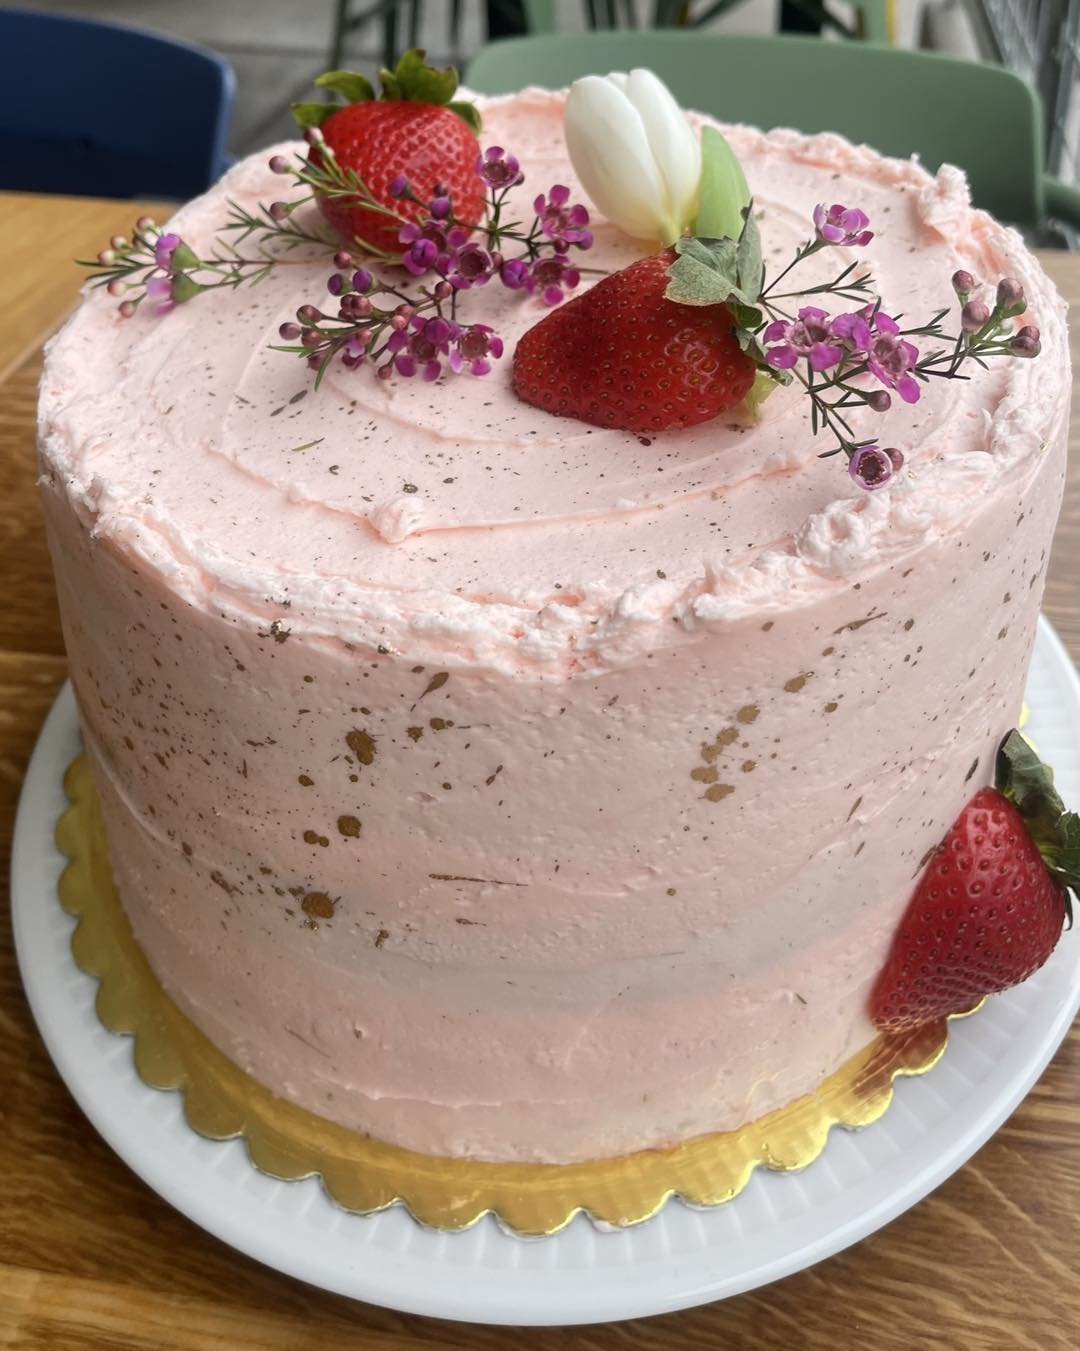 We have Almond Cake by the Slice Today or Pre-Order a Whole Cake for Mother&rsquo;s Day. Call Us - For more Mother&rsquo;s Day Options check our website - link in bio 

Almond Infused Butter Cake &ndash; $72*

3-layer almond infused butter cake with 